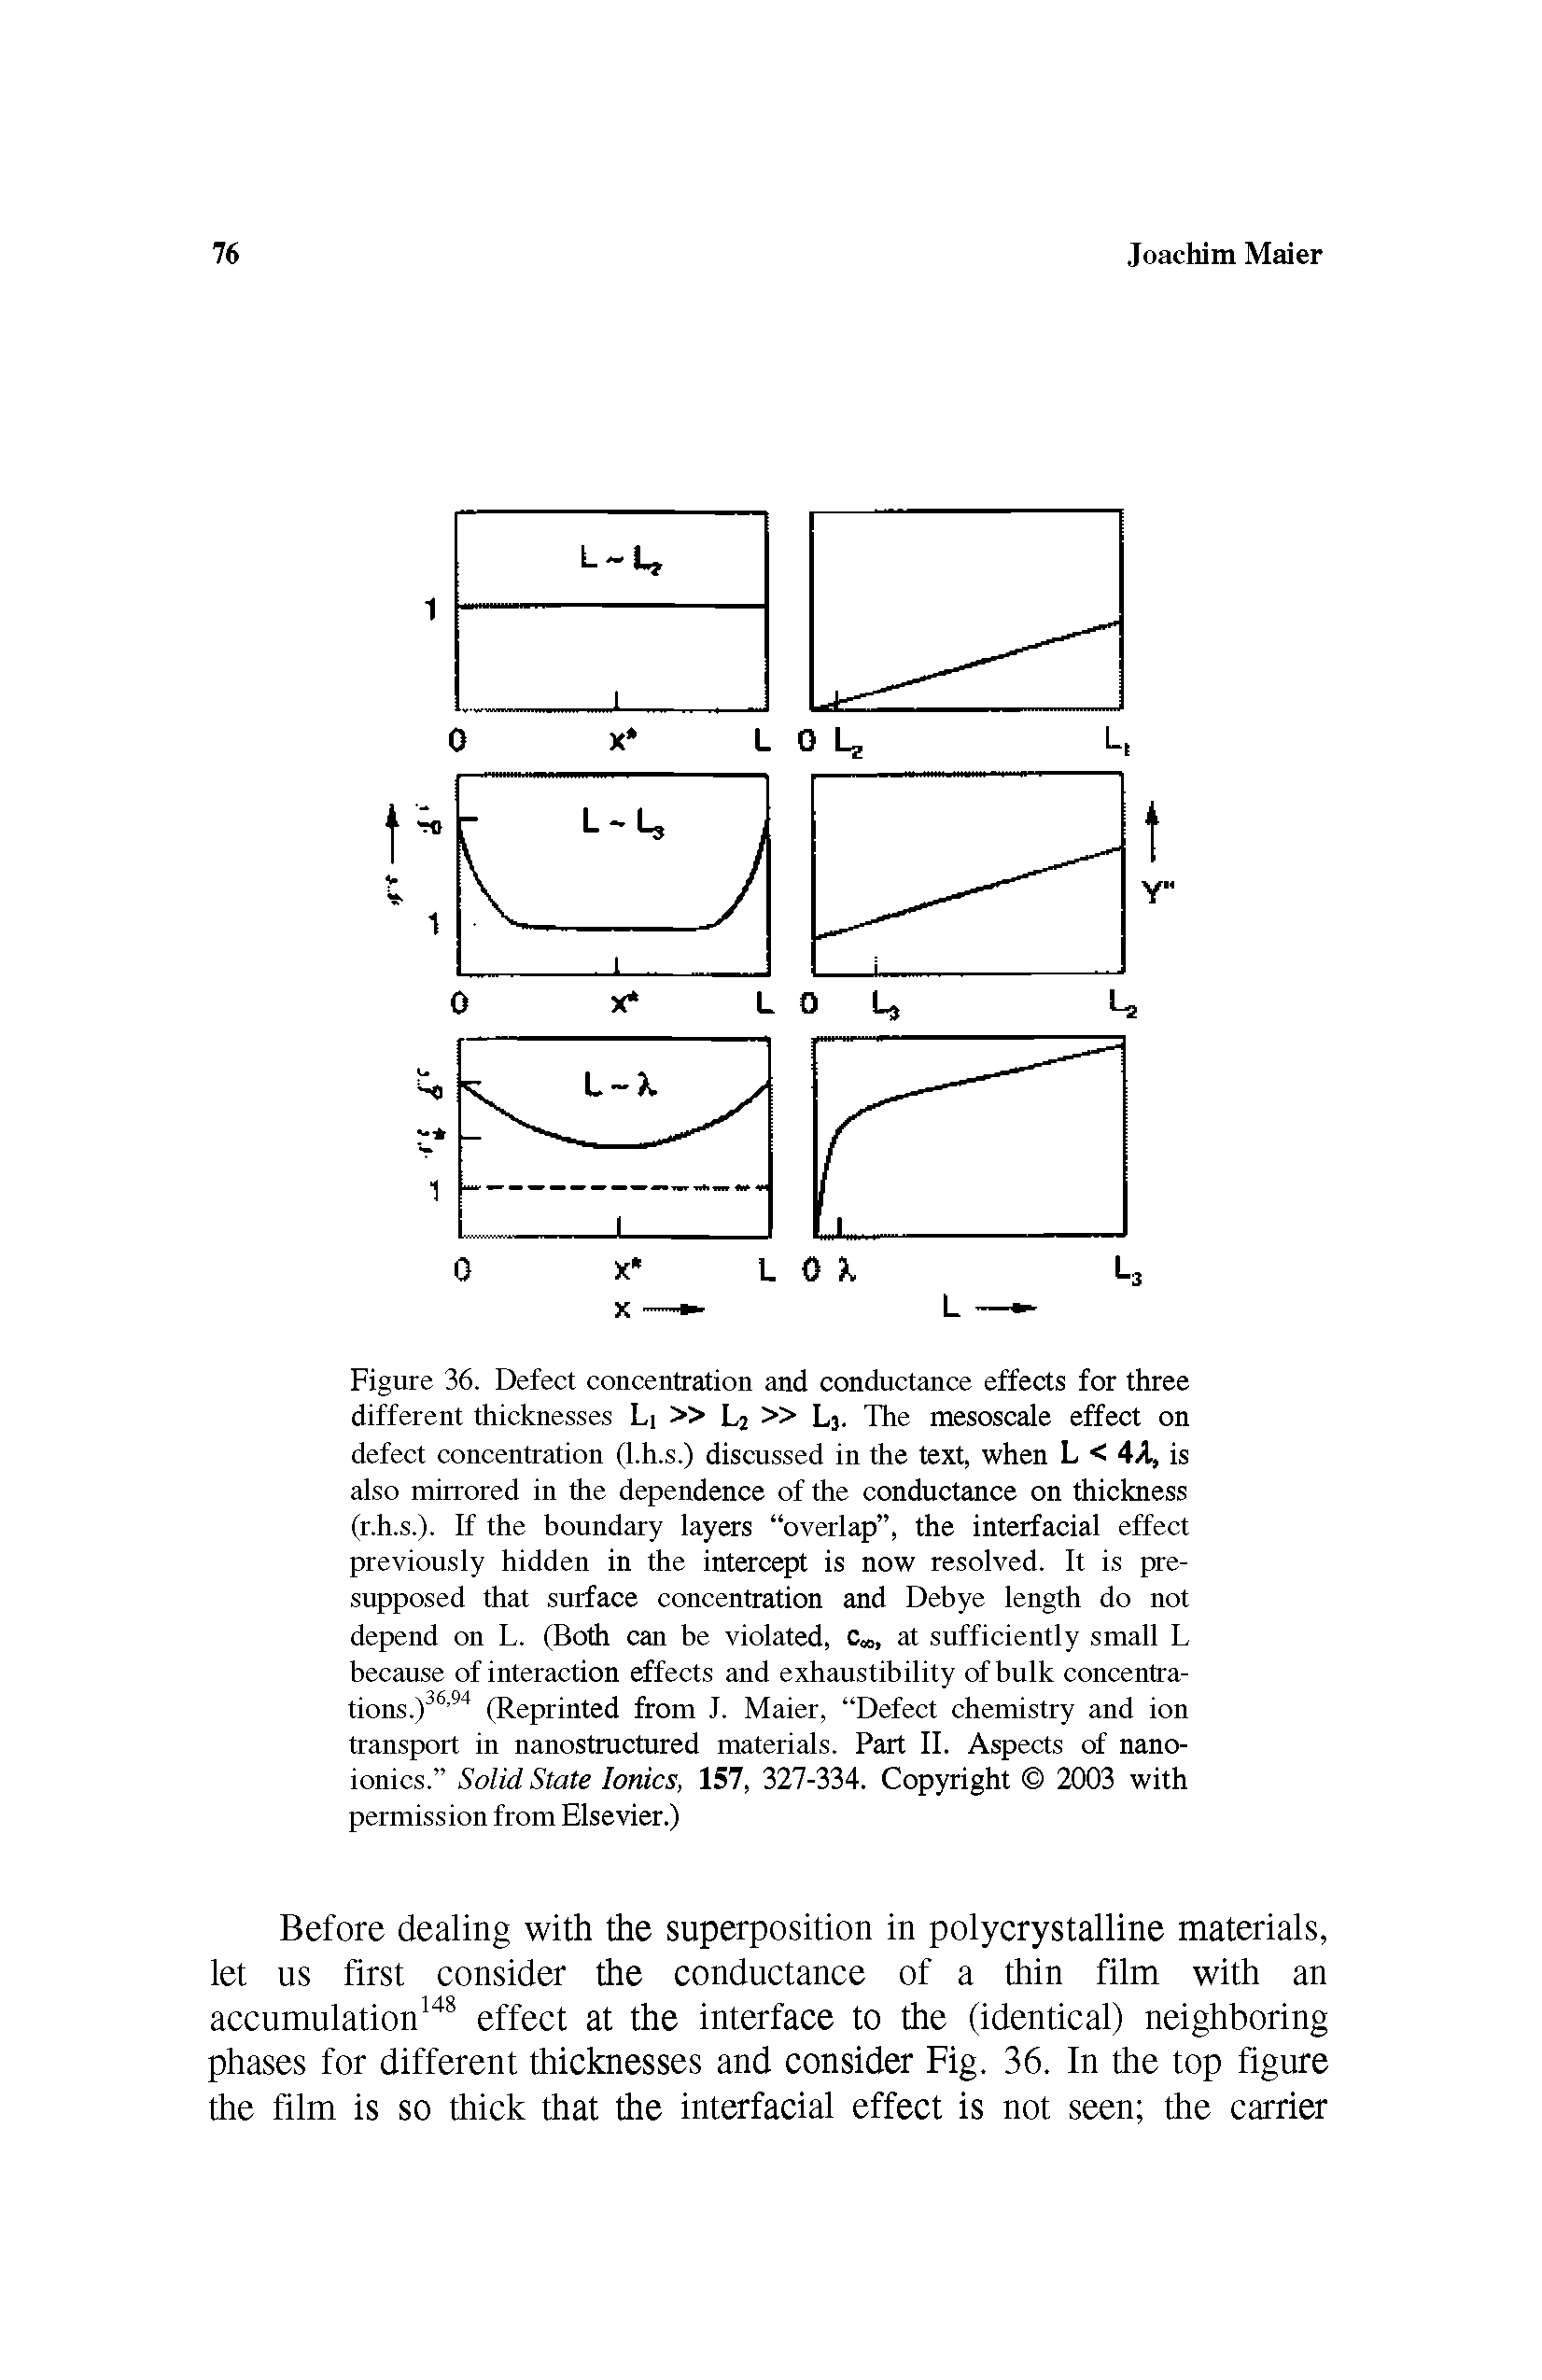 Figure 36. Defect concentration and conductance effects for three different thicknesses Li L2 Lj. The mesoscale effect on defect concentration (l.h.s.) discussed in the text, when L < 4J, is also mirrored in the dependence of the conductance on thickness (r.h.s.). If the boundary layers overlap , the interfacial effect previously hidden in the intercept is now resolved. It is presupposed that surface concentration and Debye length do not depend on L. (Both can be violated, c , at sufficiently small L because of interaction effects and exhaustibility of bulk concentrations.)36 94 (Reprinted from J. Maier, Defect chemistry and ion transport in nanostructured materials. Part II. Aspects of nanoionics. Solid State Ionics, 157, 327-334. Copyright 2003 with permission from Elsevier.)...